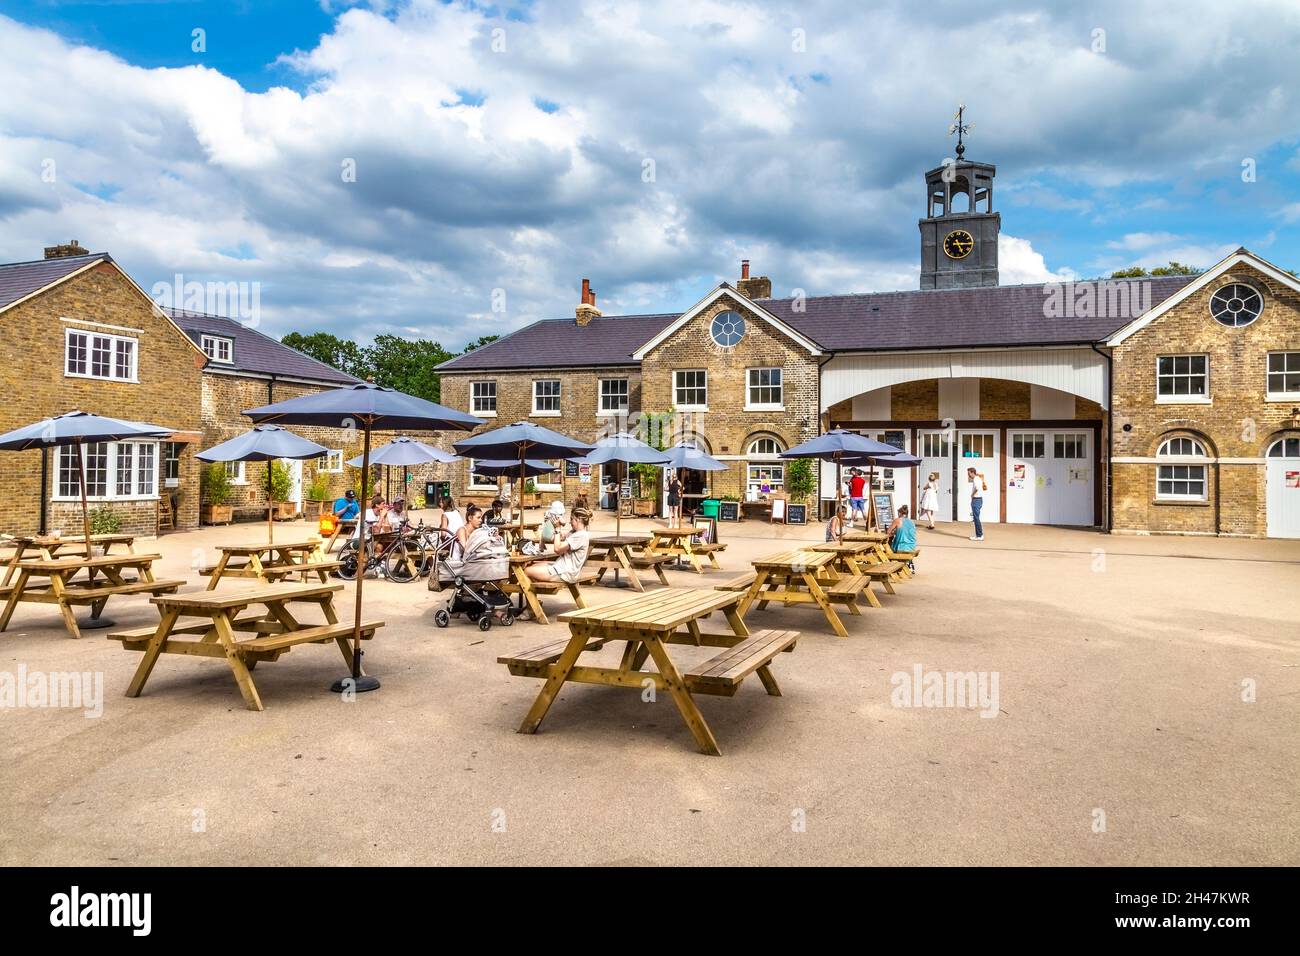 The Homestead Cafe located inside former Georgian stables at Beckenham Place Park, London, UK Stock Photo